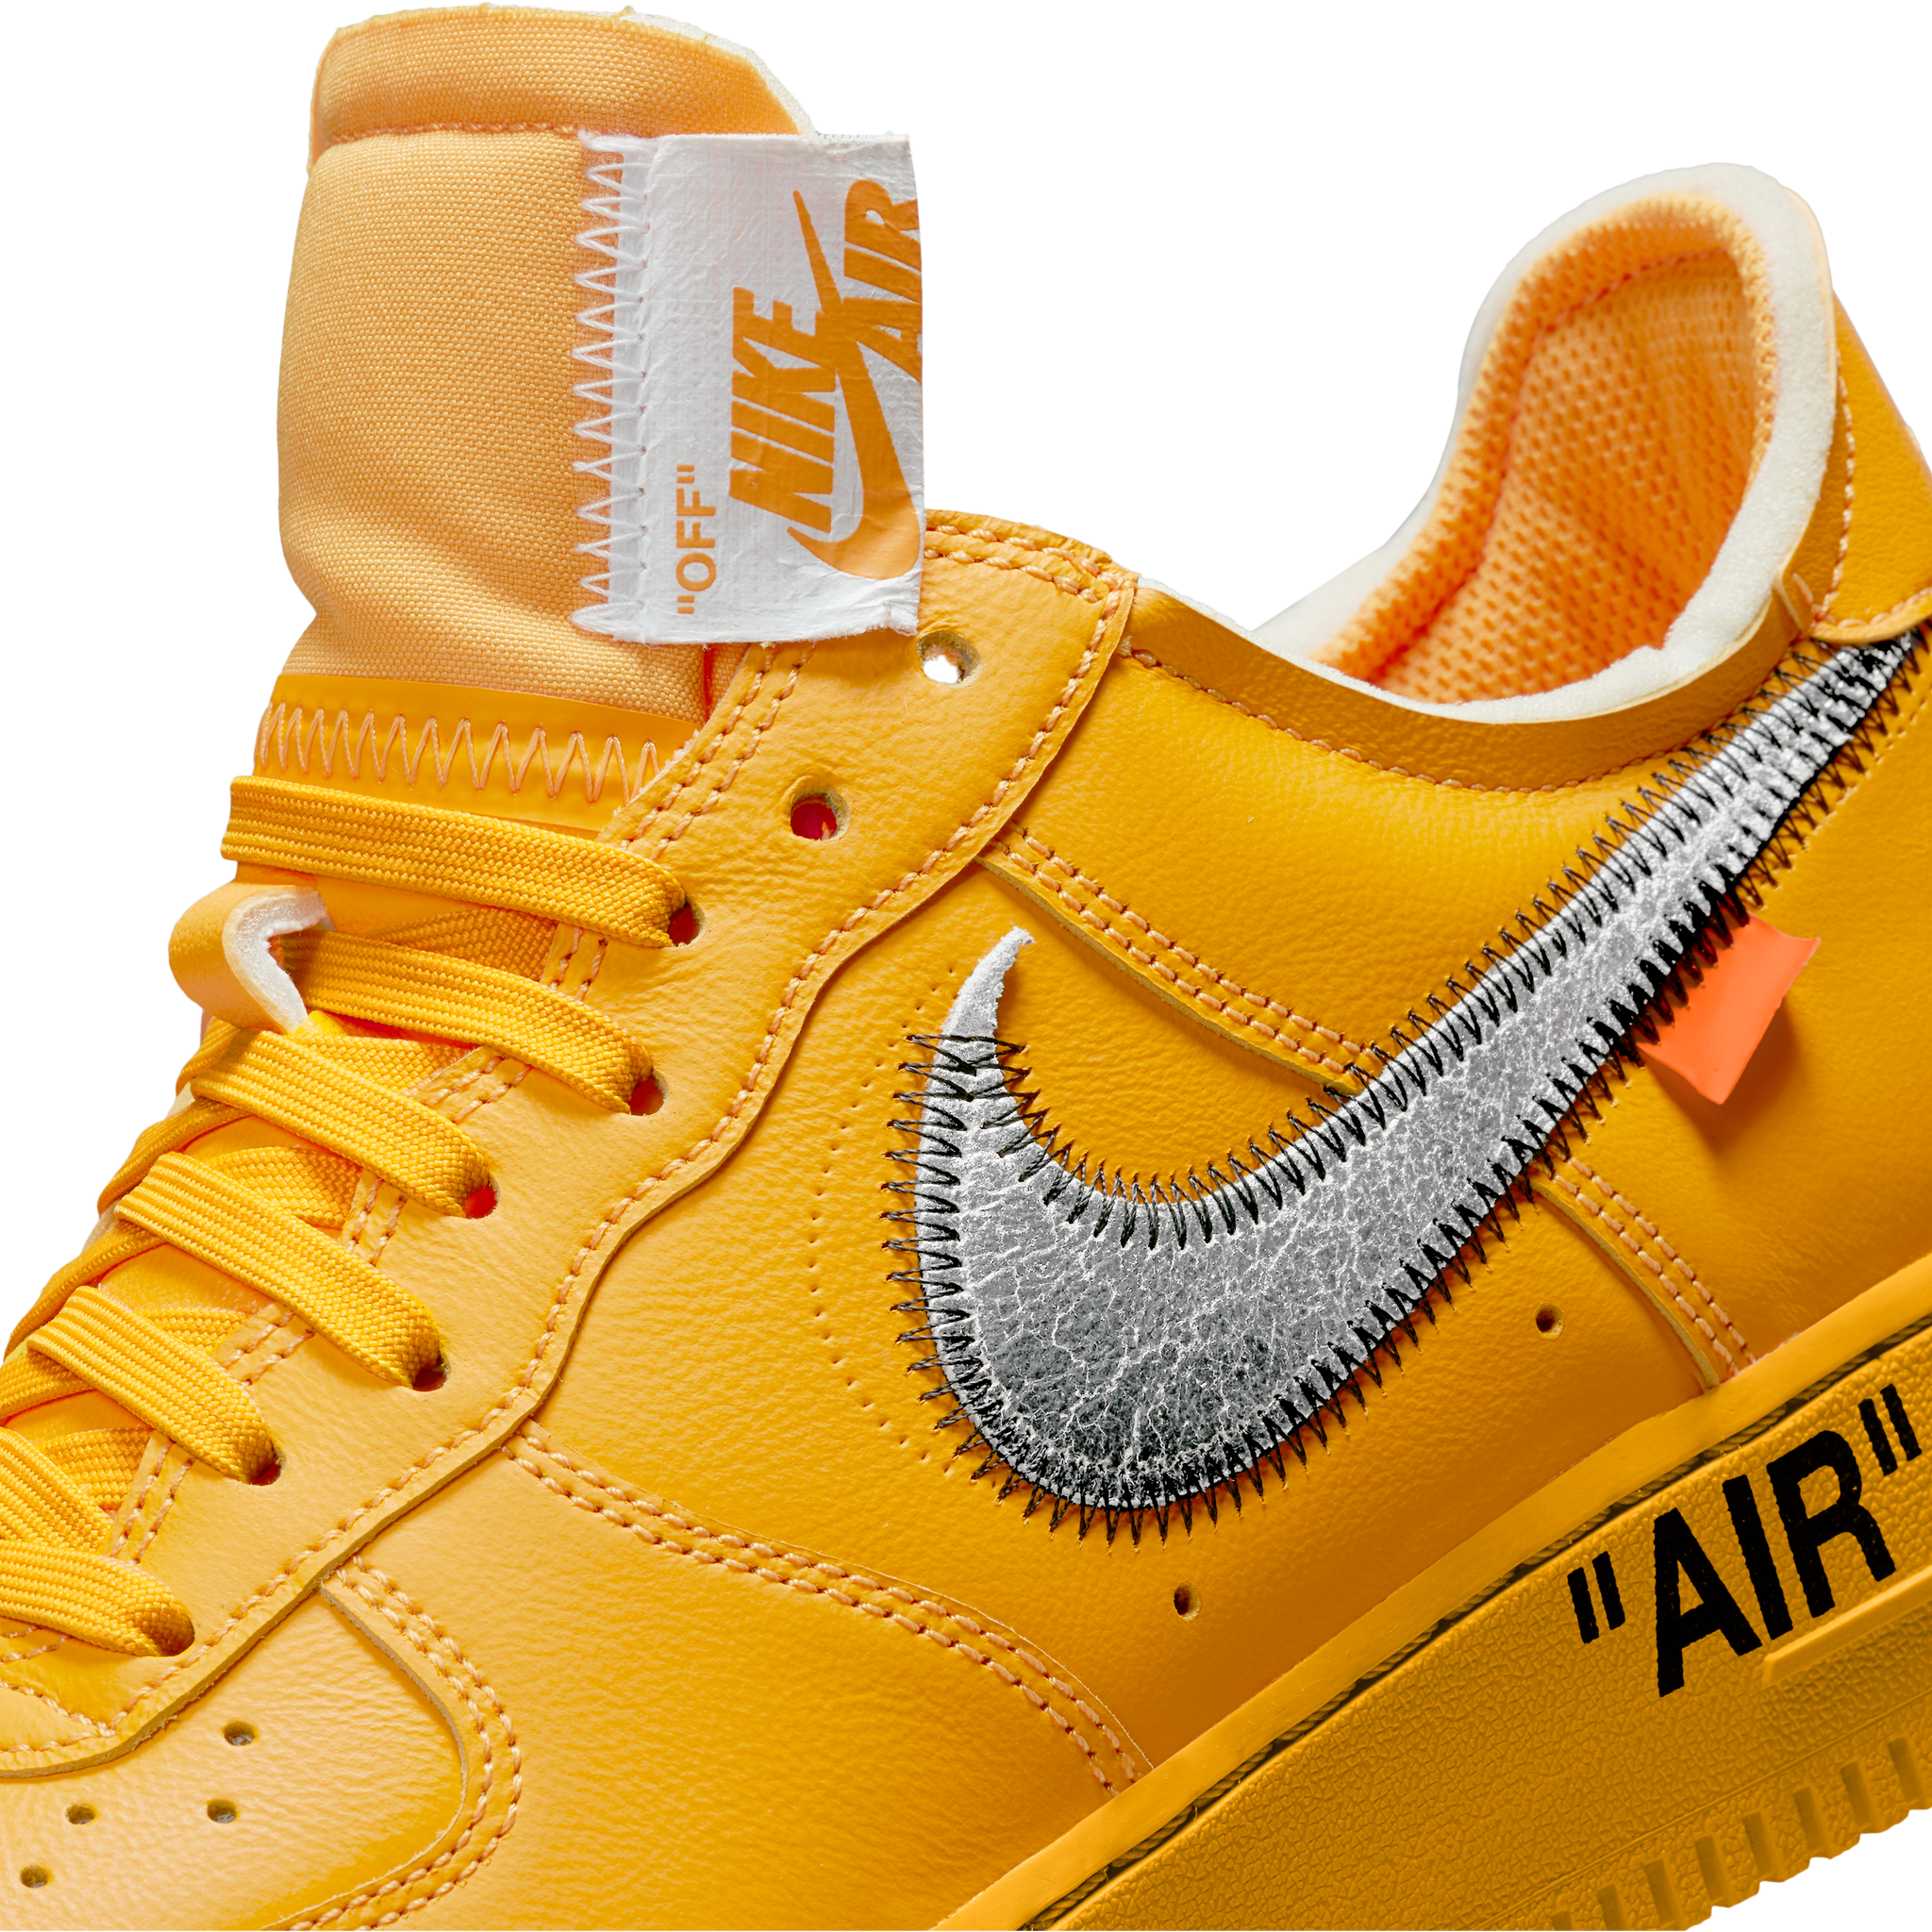 OFF WHITE AIR FORCE 1 CANARY YELLOW 💛 💛💛 ON FEET REP REVIEW 🐥 @kickmax0  